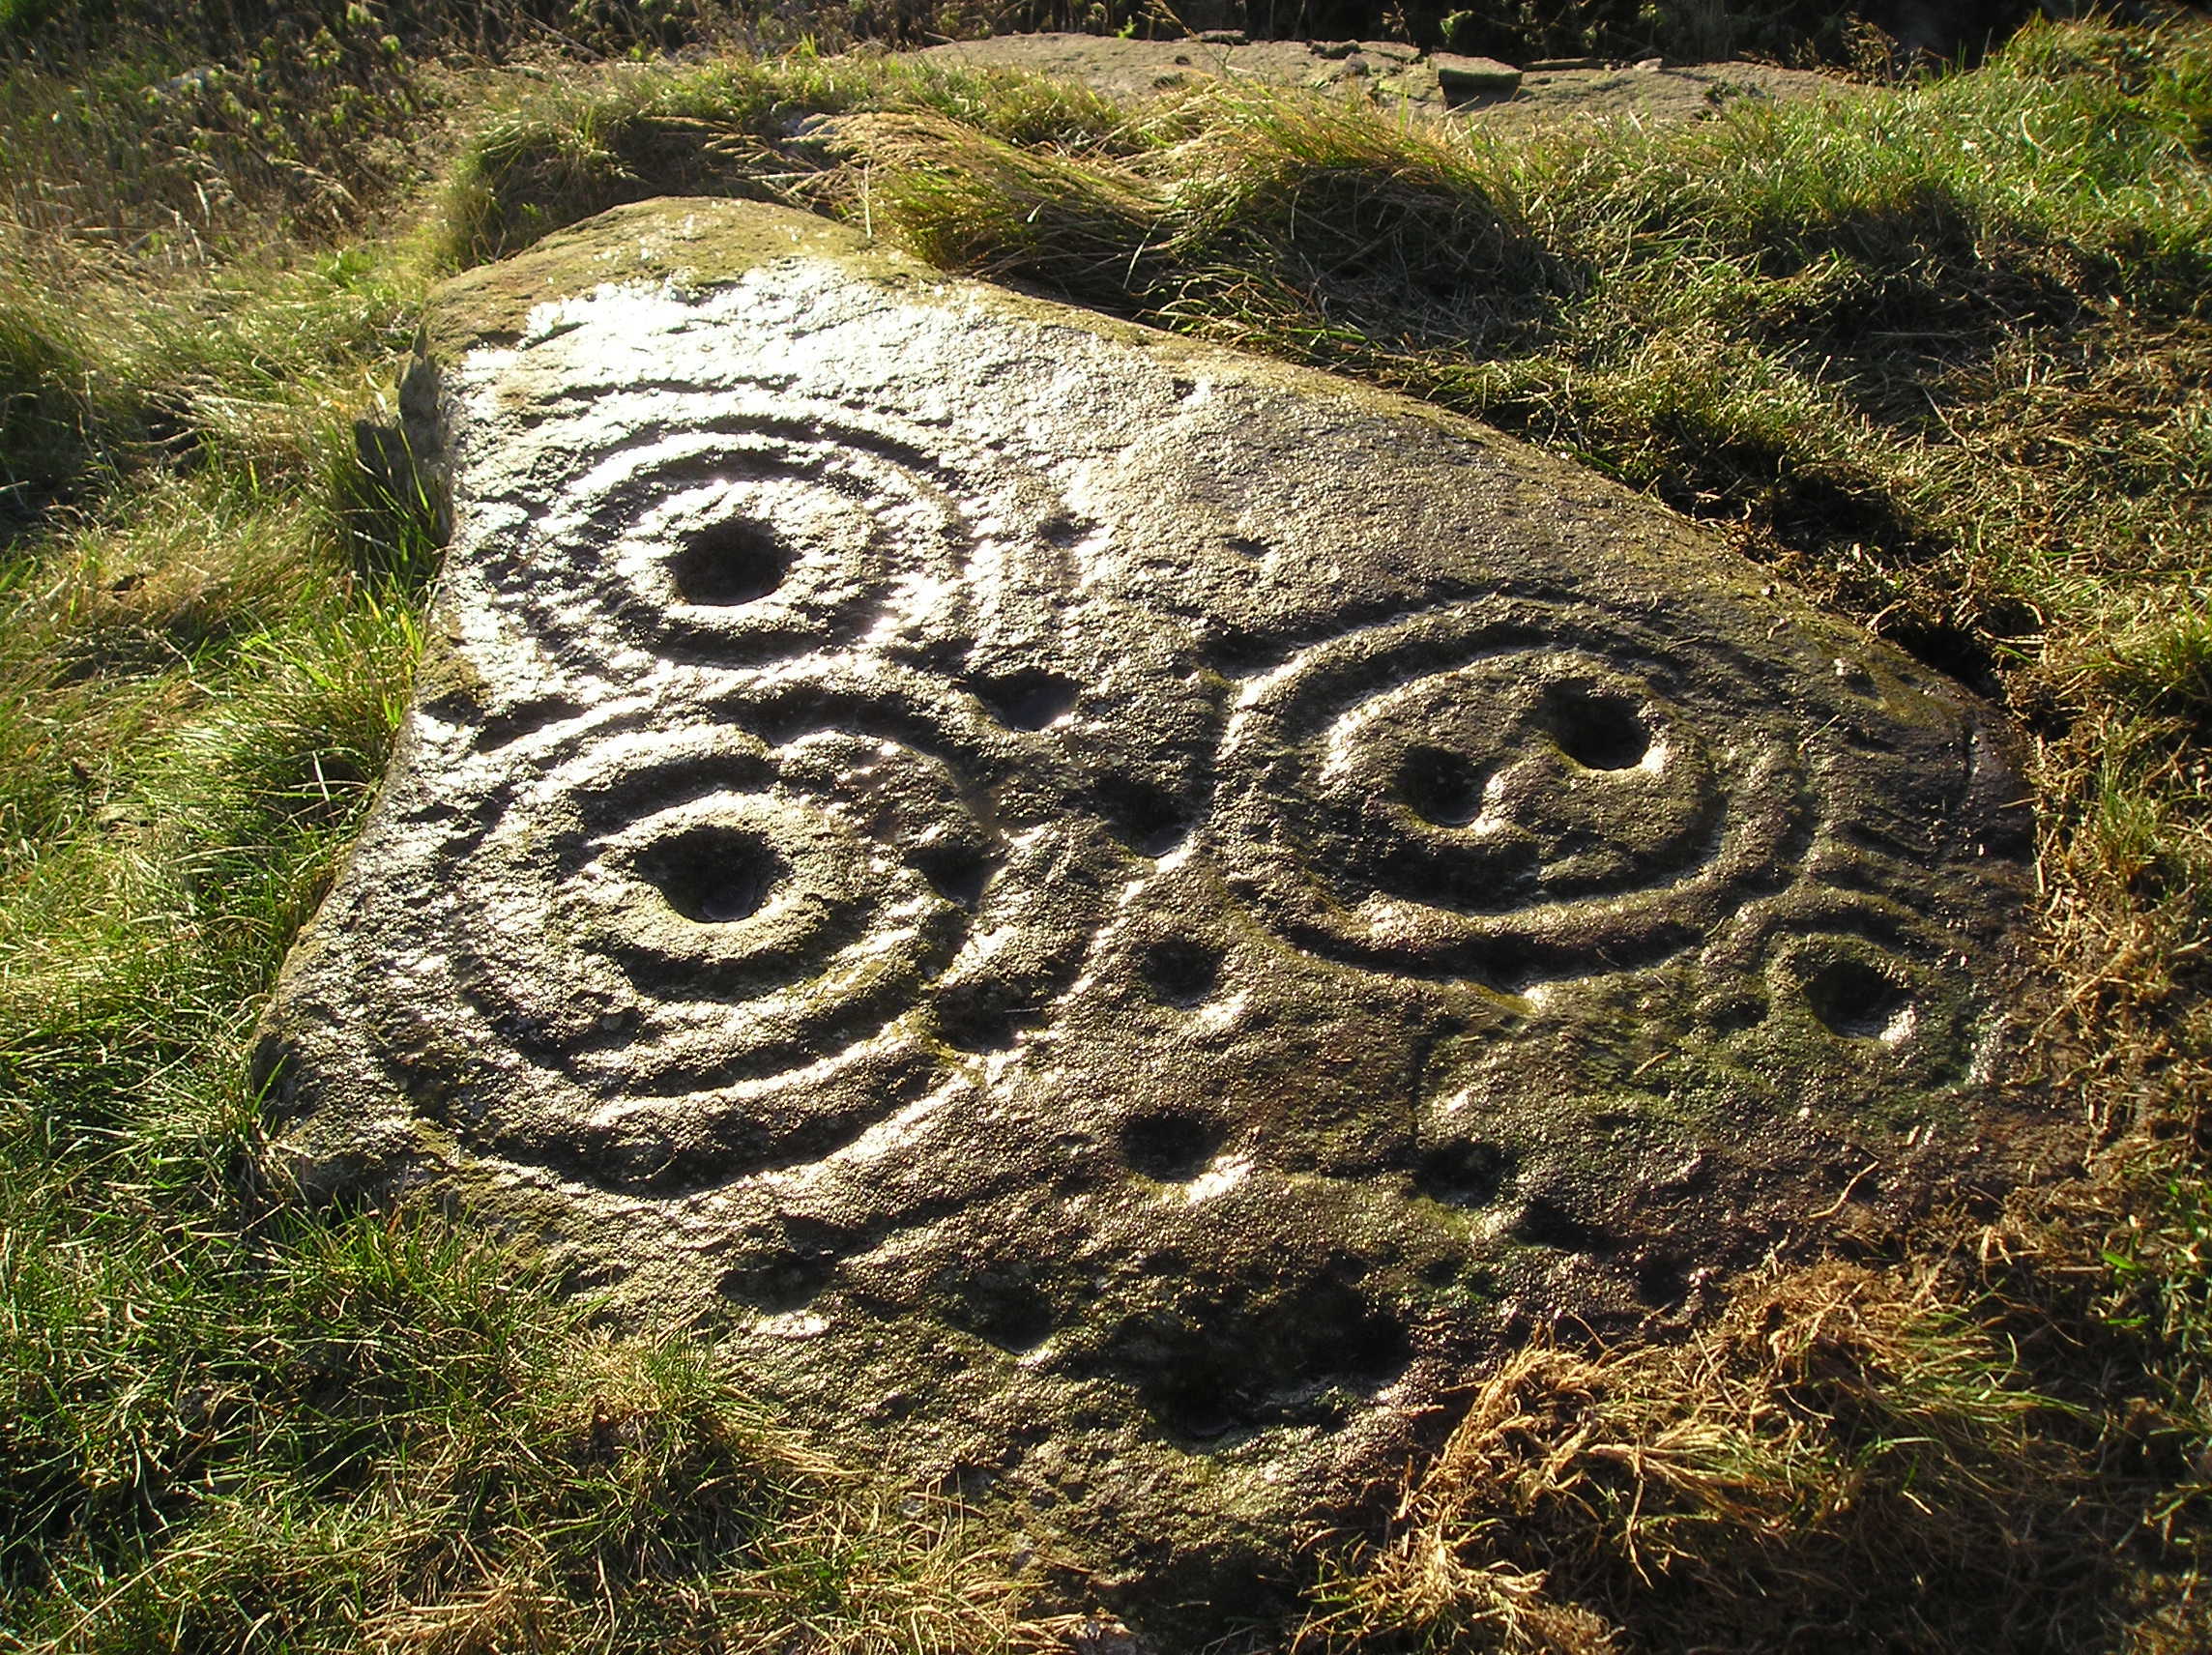 A piece of rock art discovered by George on Gallow Hill, just north of Dundee.